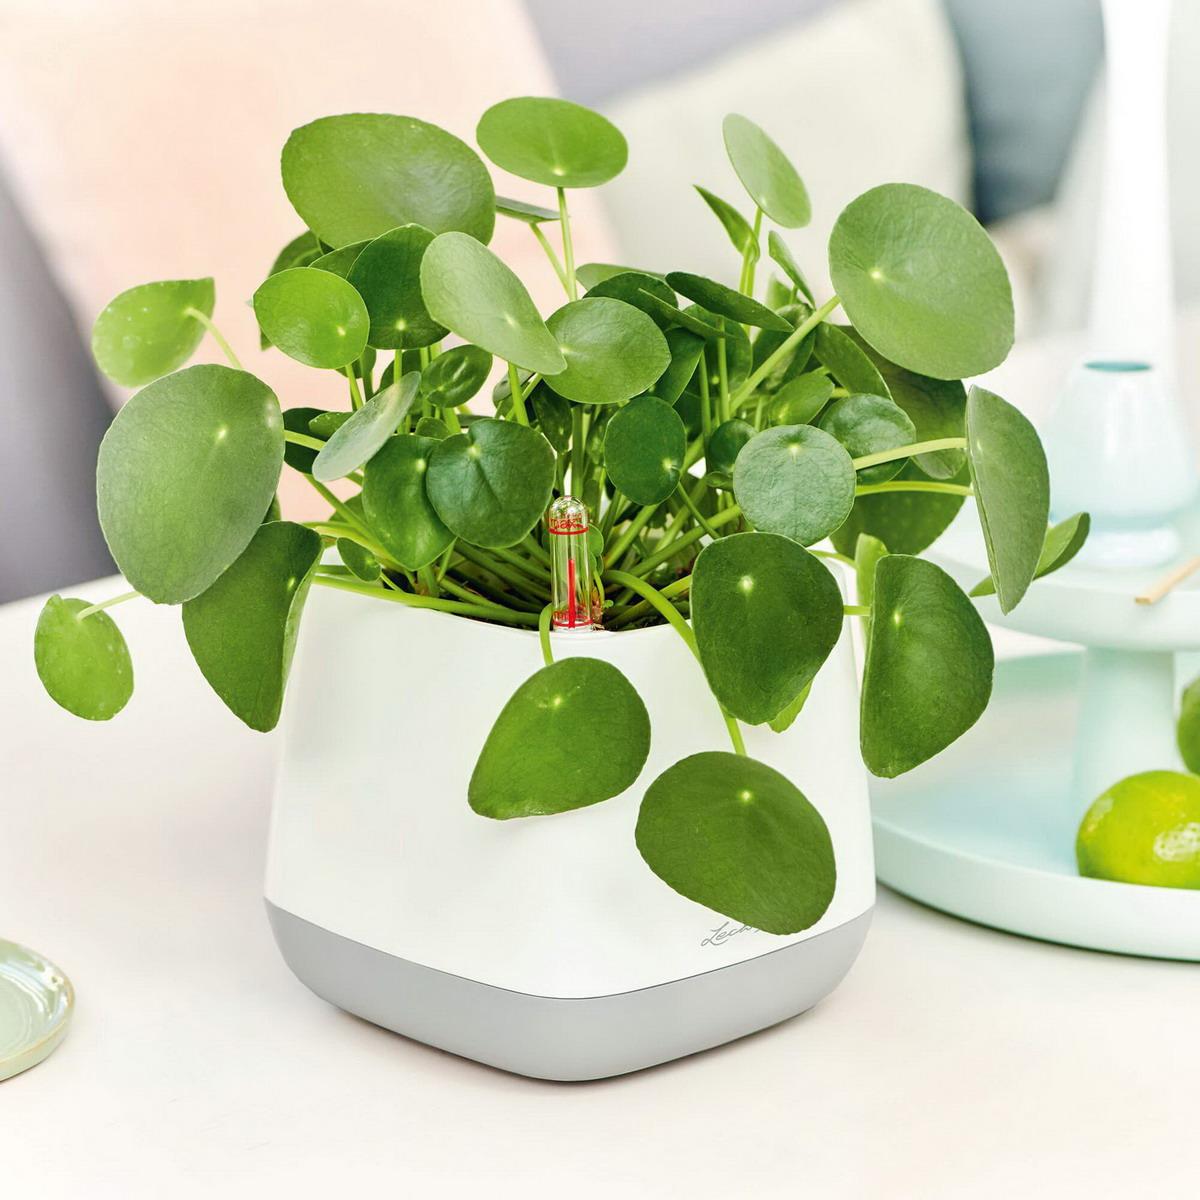 LECHUZA YULA Plant Bag White/Green Semi-Gloss Poly Resin Floor Self-watering Planter with Water Level Indicator H18 L38 W17 cm, 4.5L - citiplants.com